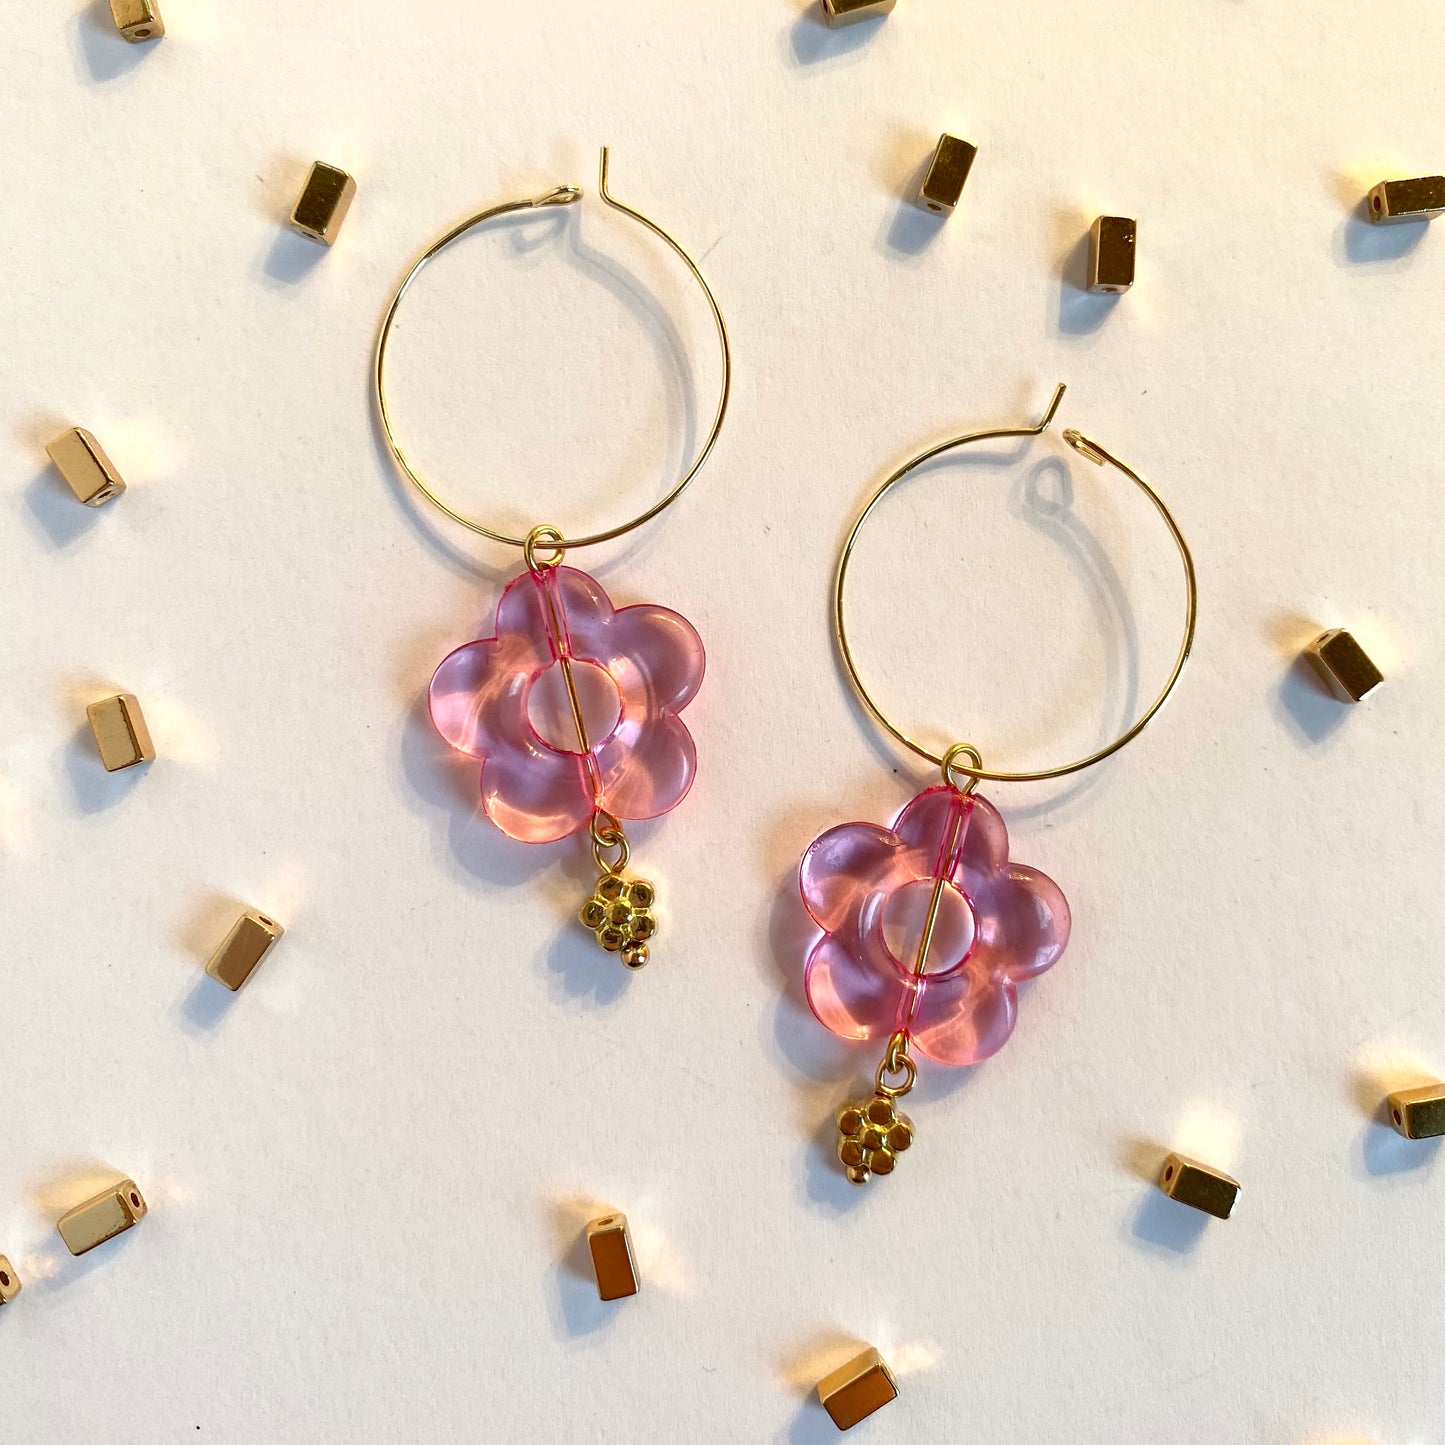 Pink Flower Earrings with Small Gold Flowers